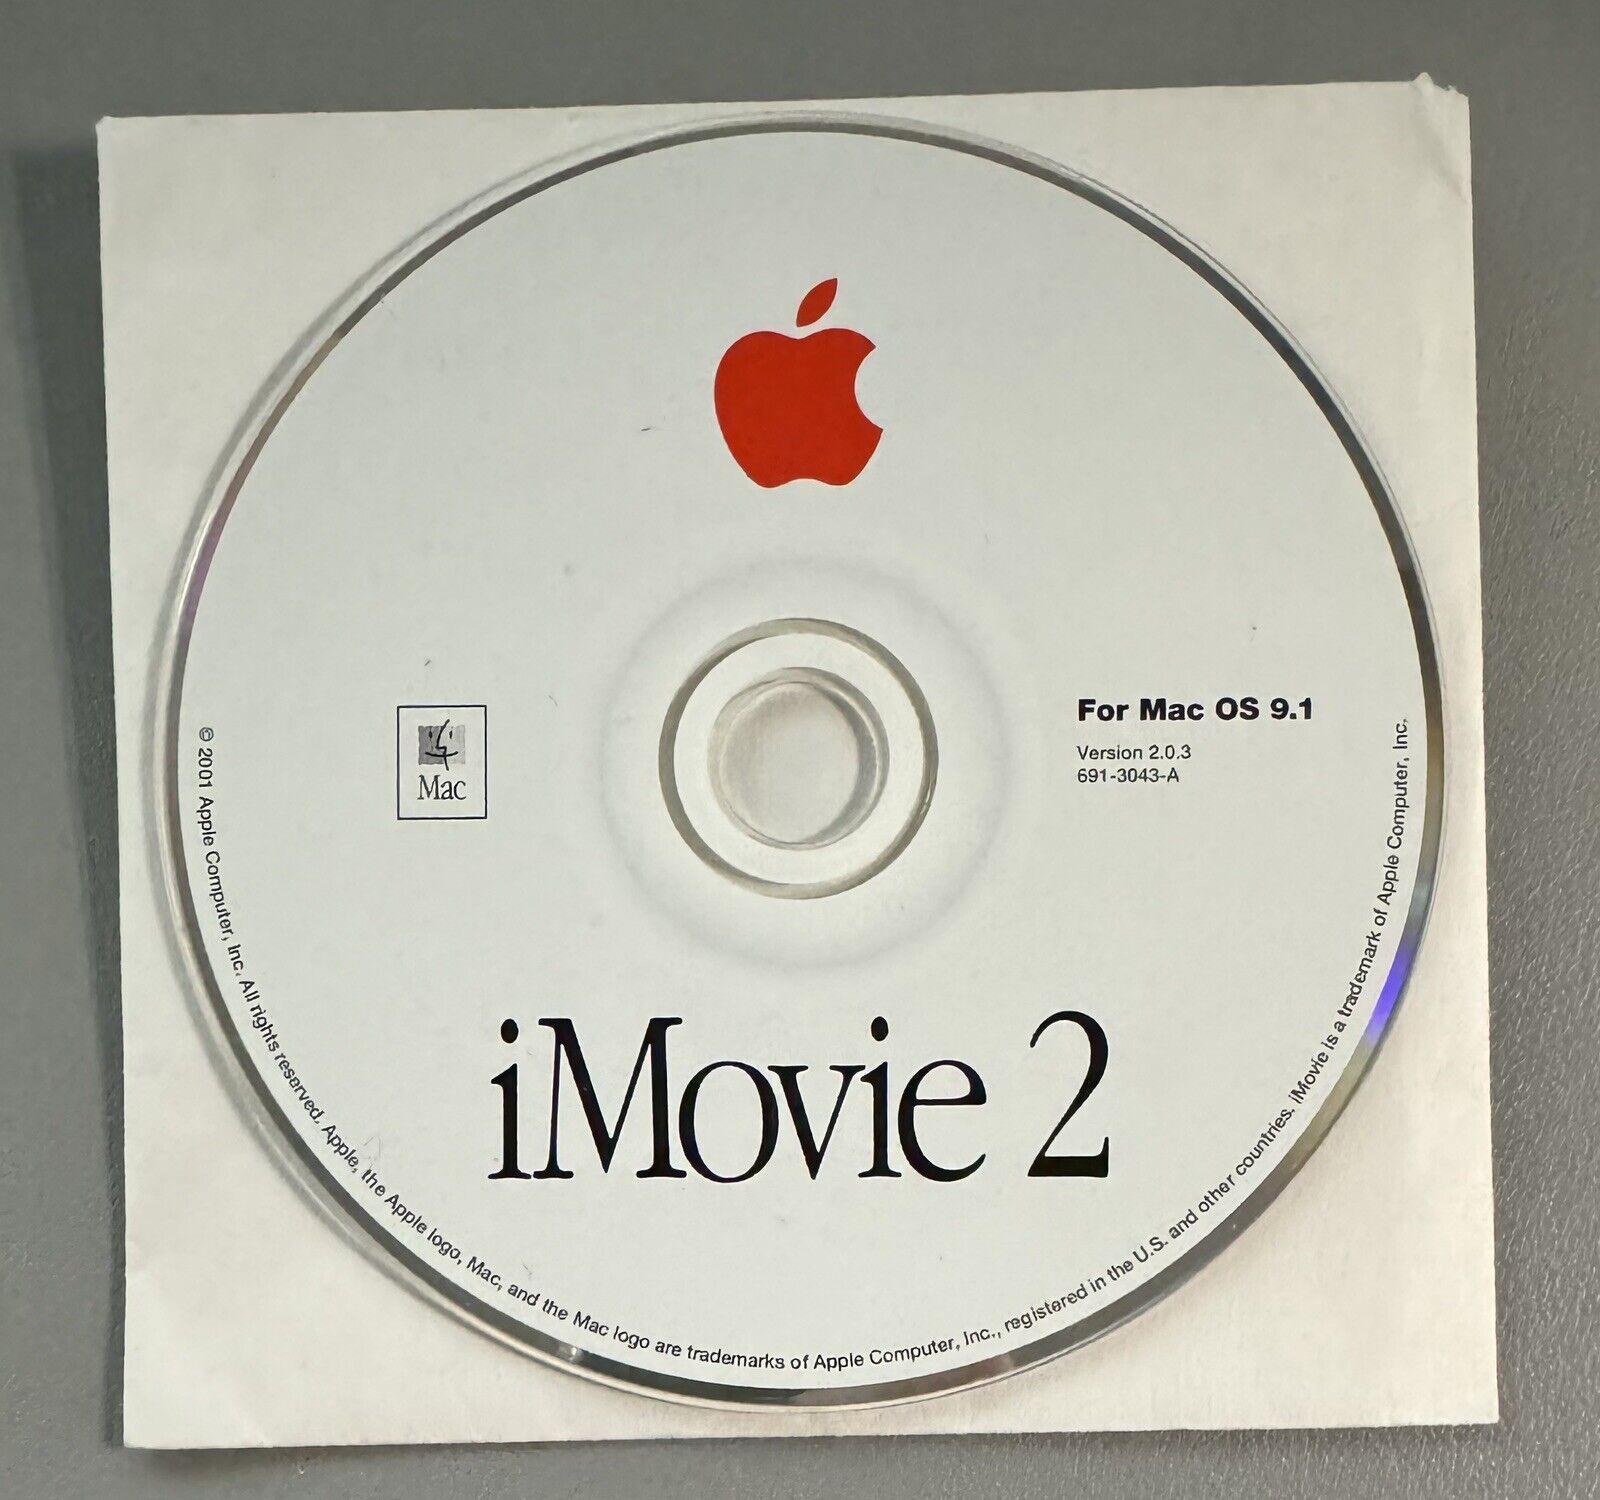 OEM Apple iMovie 2 For Mac OS 9.1 Software Version 2.0.3 691-3043-A